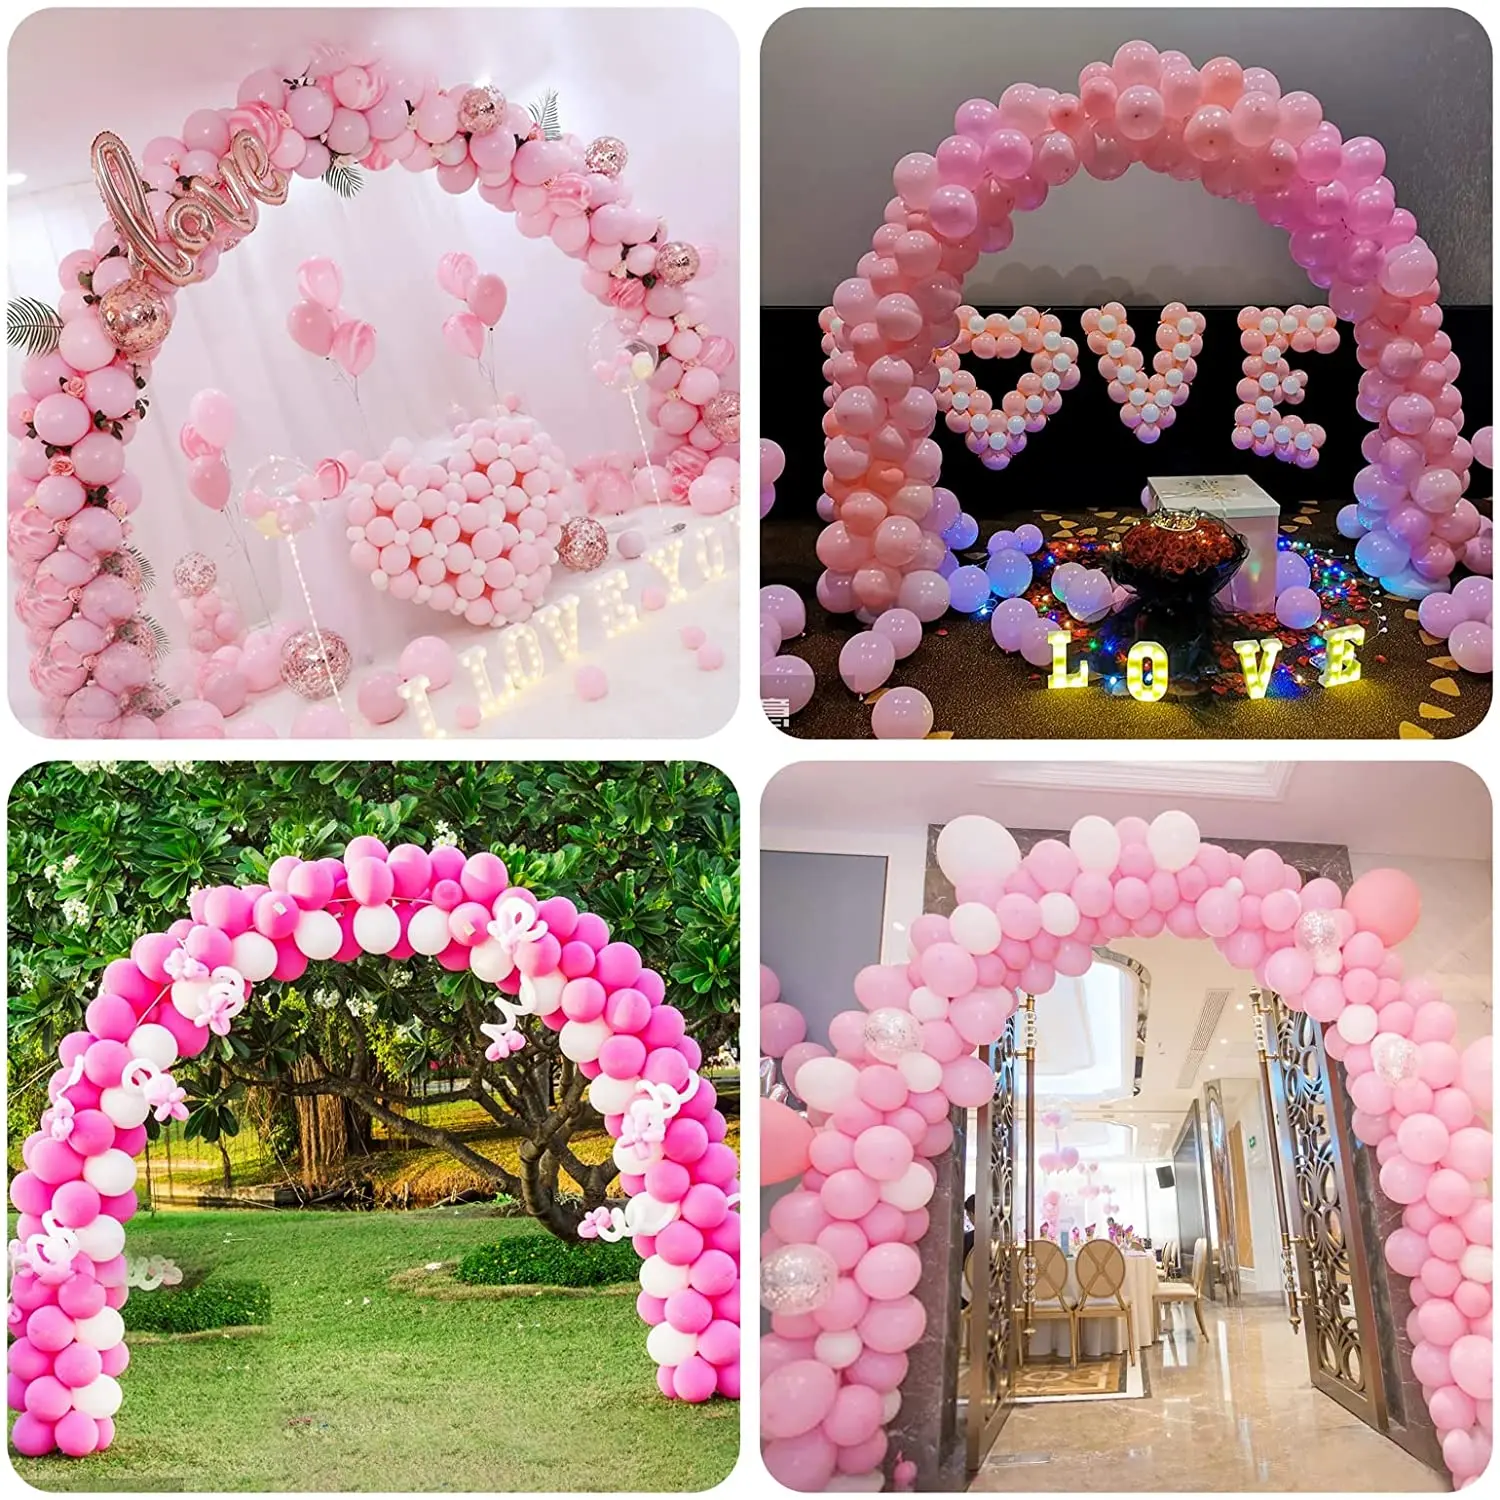 Go through applause Sightseeing Wholesale Amazon Sales Wedding Party Decoration 9ft Tall 10ft Wide Large  Balloon Arch Kit With 2 Heavy Water Bases - Buy Balloon Arch Frame,Balloon  Ring Arch,Balloon Arch Stand For Decoration Product on